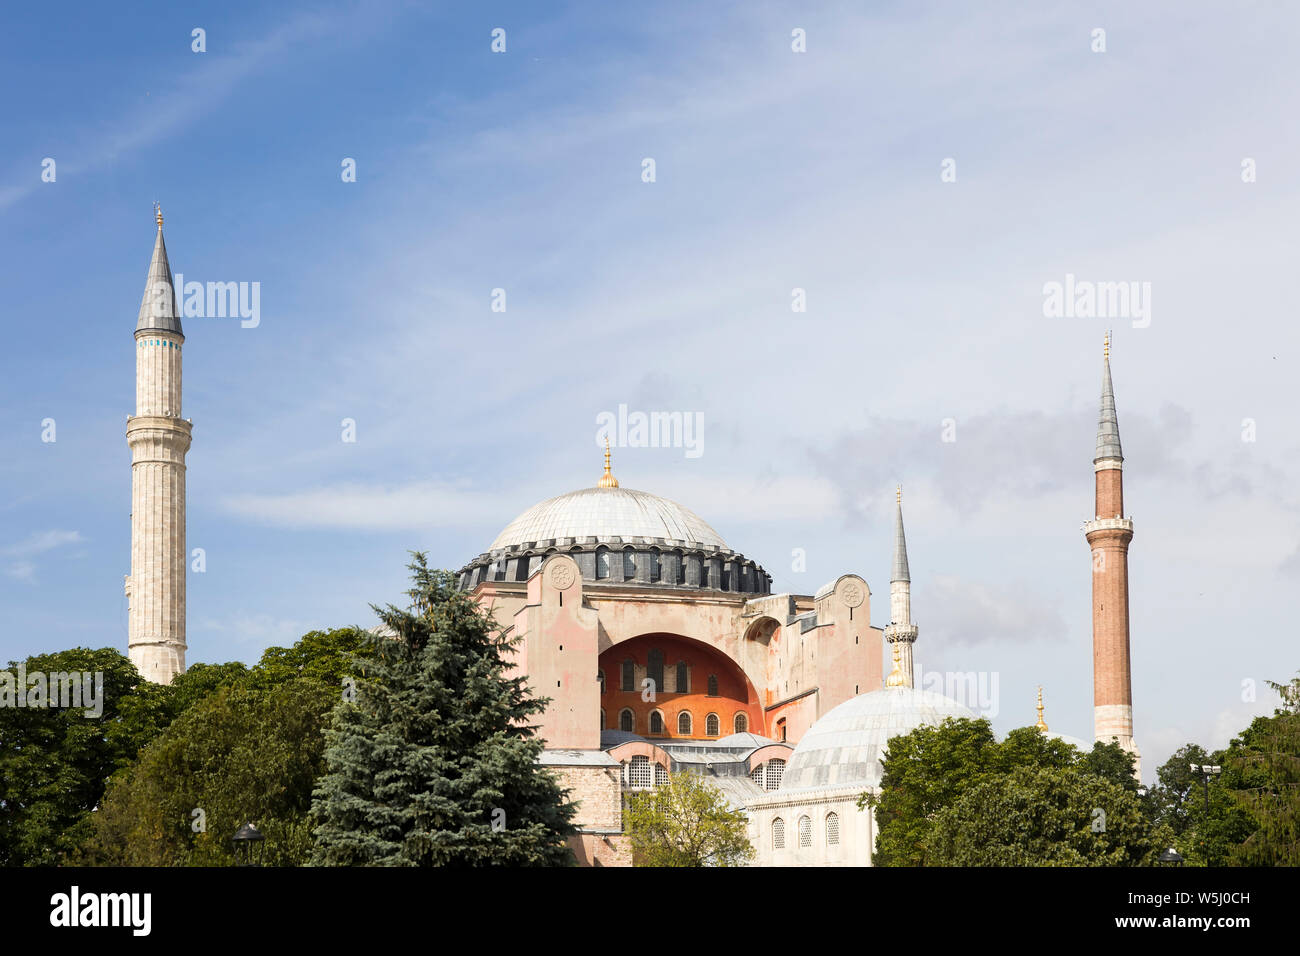 View at Hagia Sophia domes and minarets in the old town of Istanbul, Turkey Stock Photo